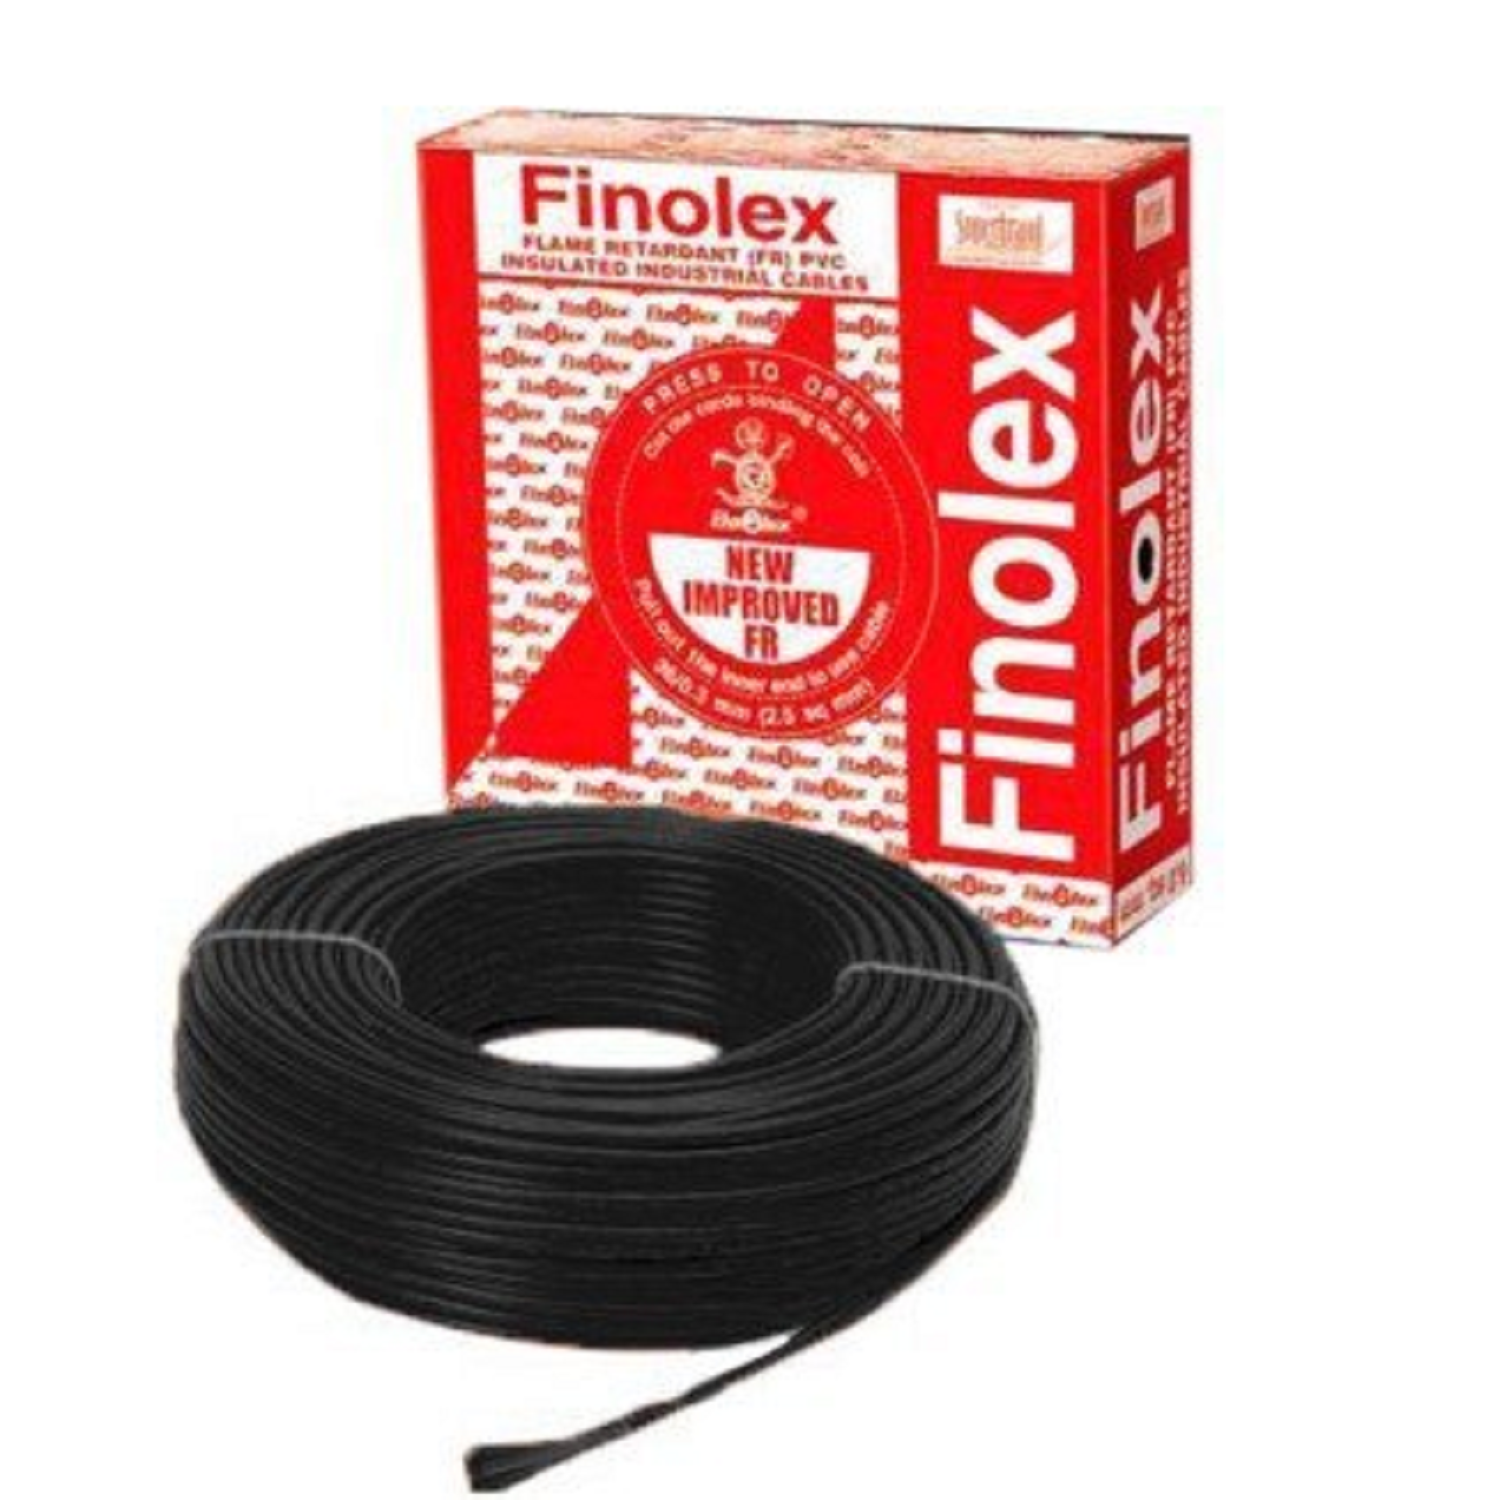 4.0 Sqmm Finolex FR Single Core Copper Wire (90 Mtr) With PVC Insulated for House 38 Industrial Uses